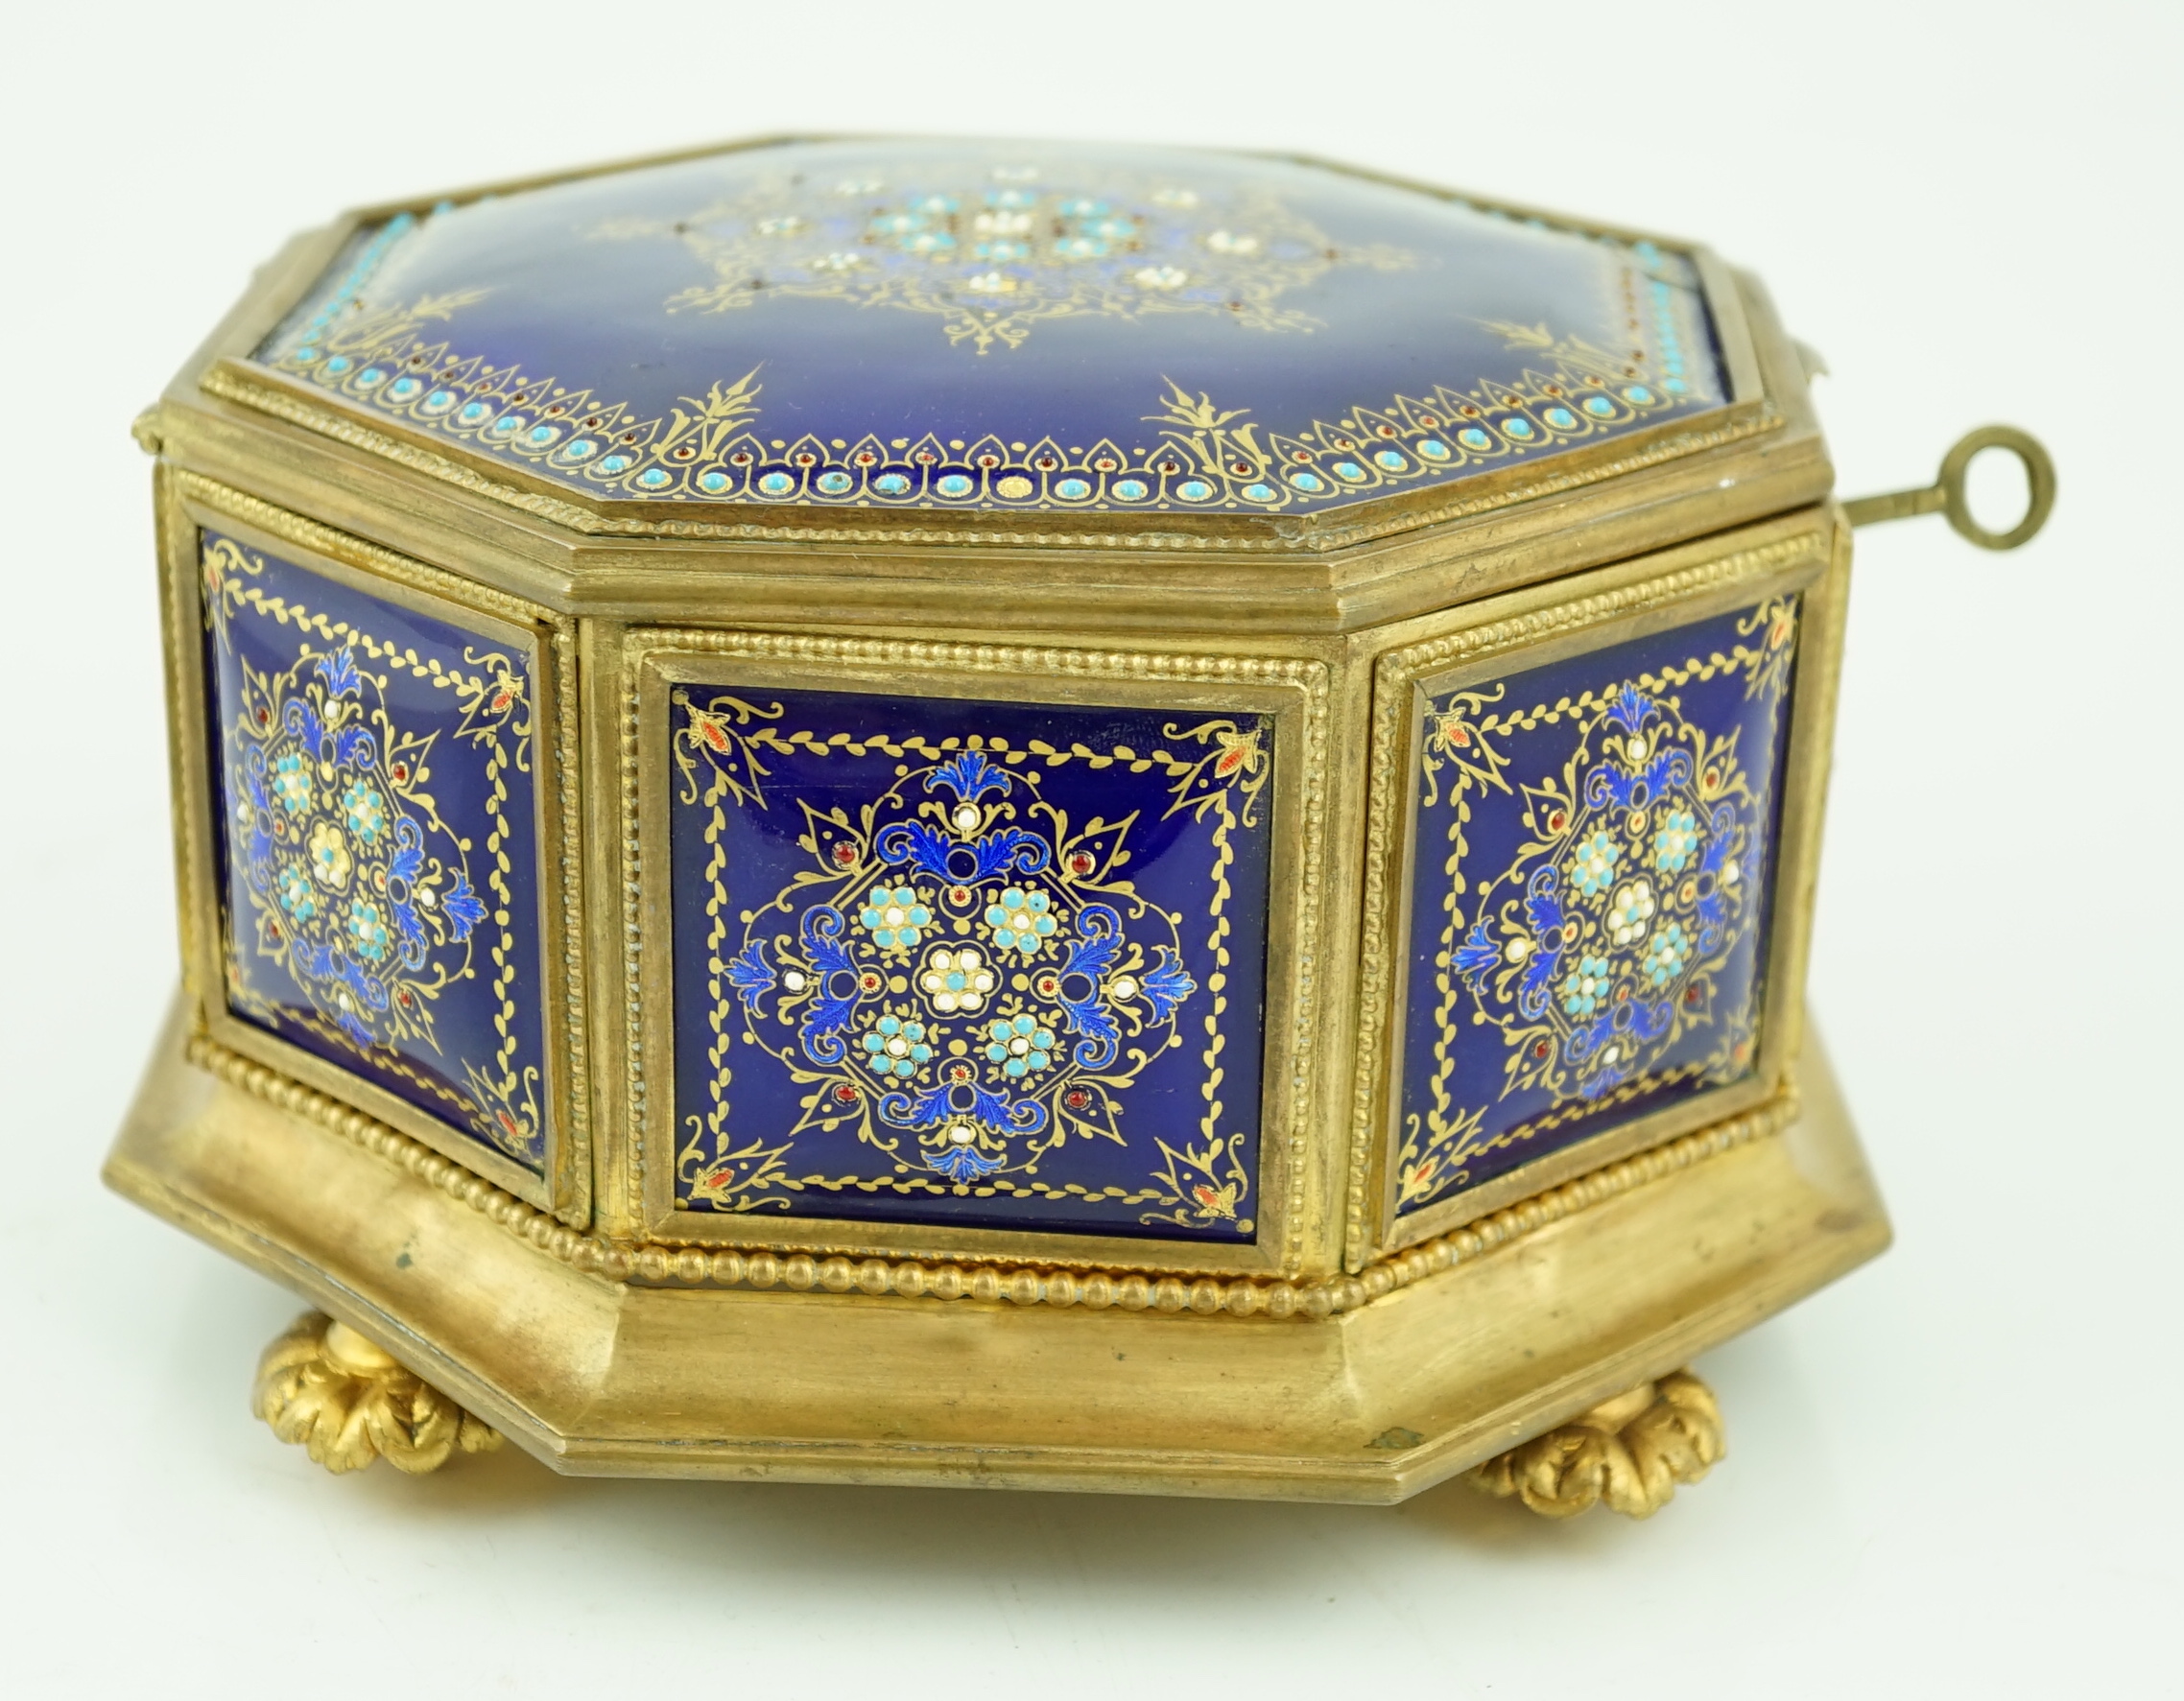 A 19th century French Limoges enamel casket, of octagonal form with jewelled floral decoration and - Image 5 of 7